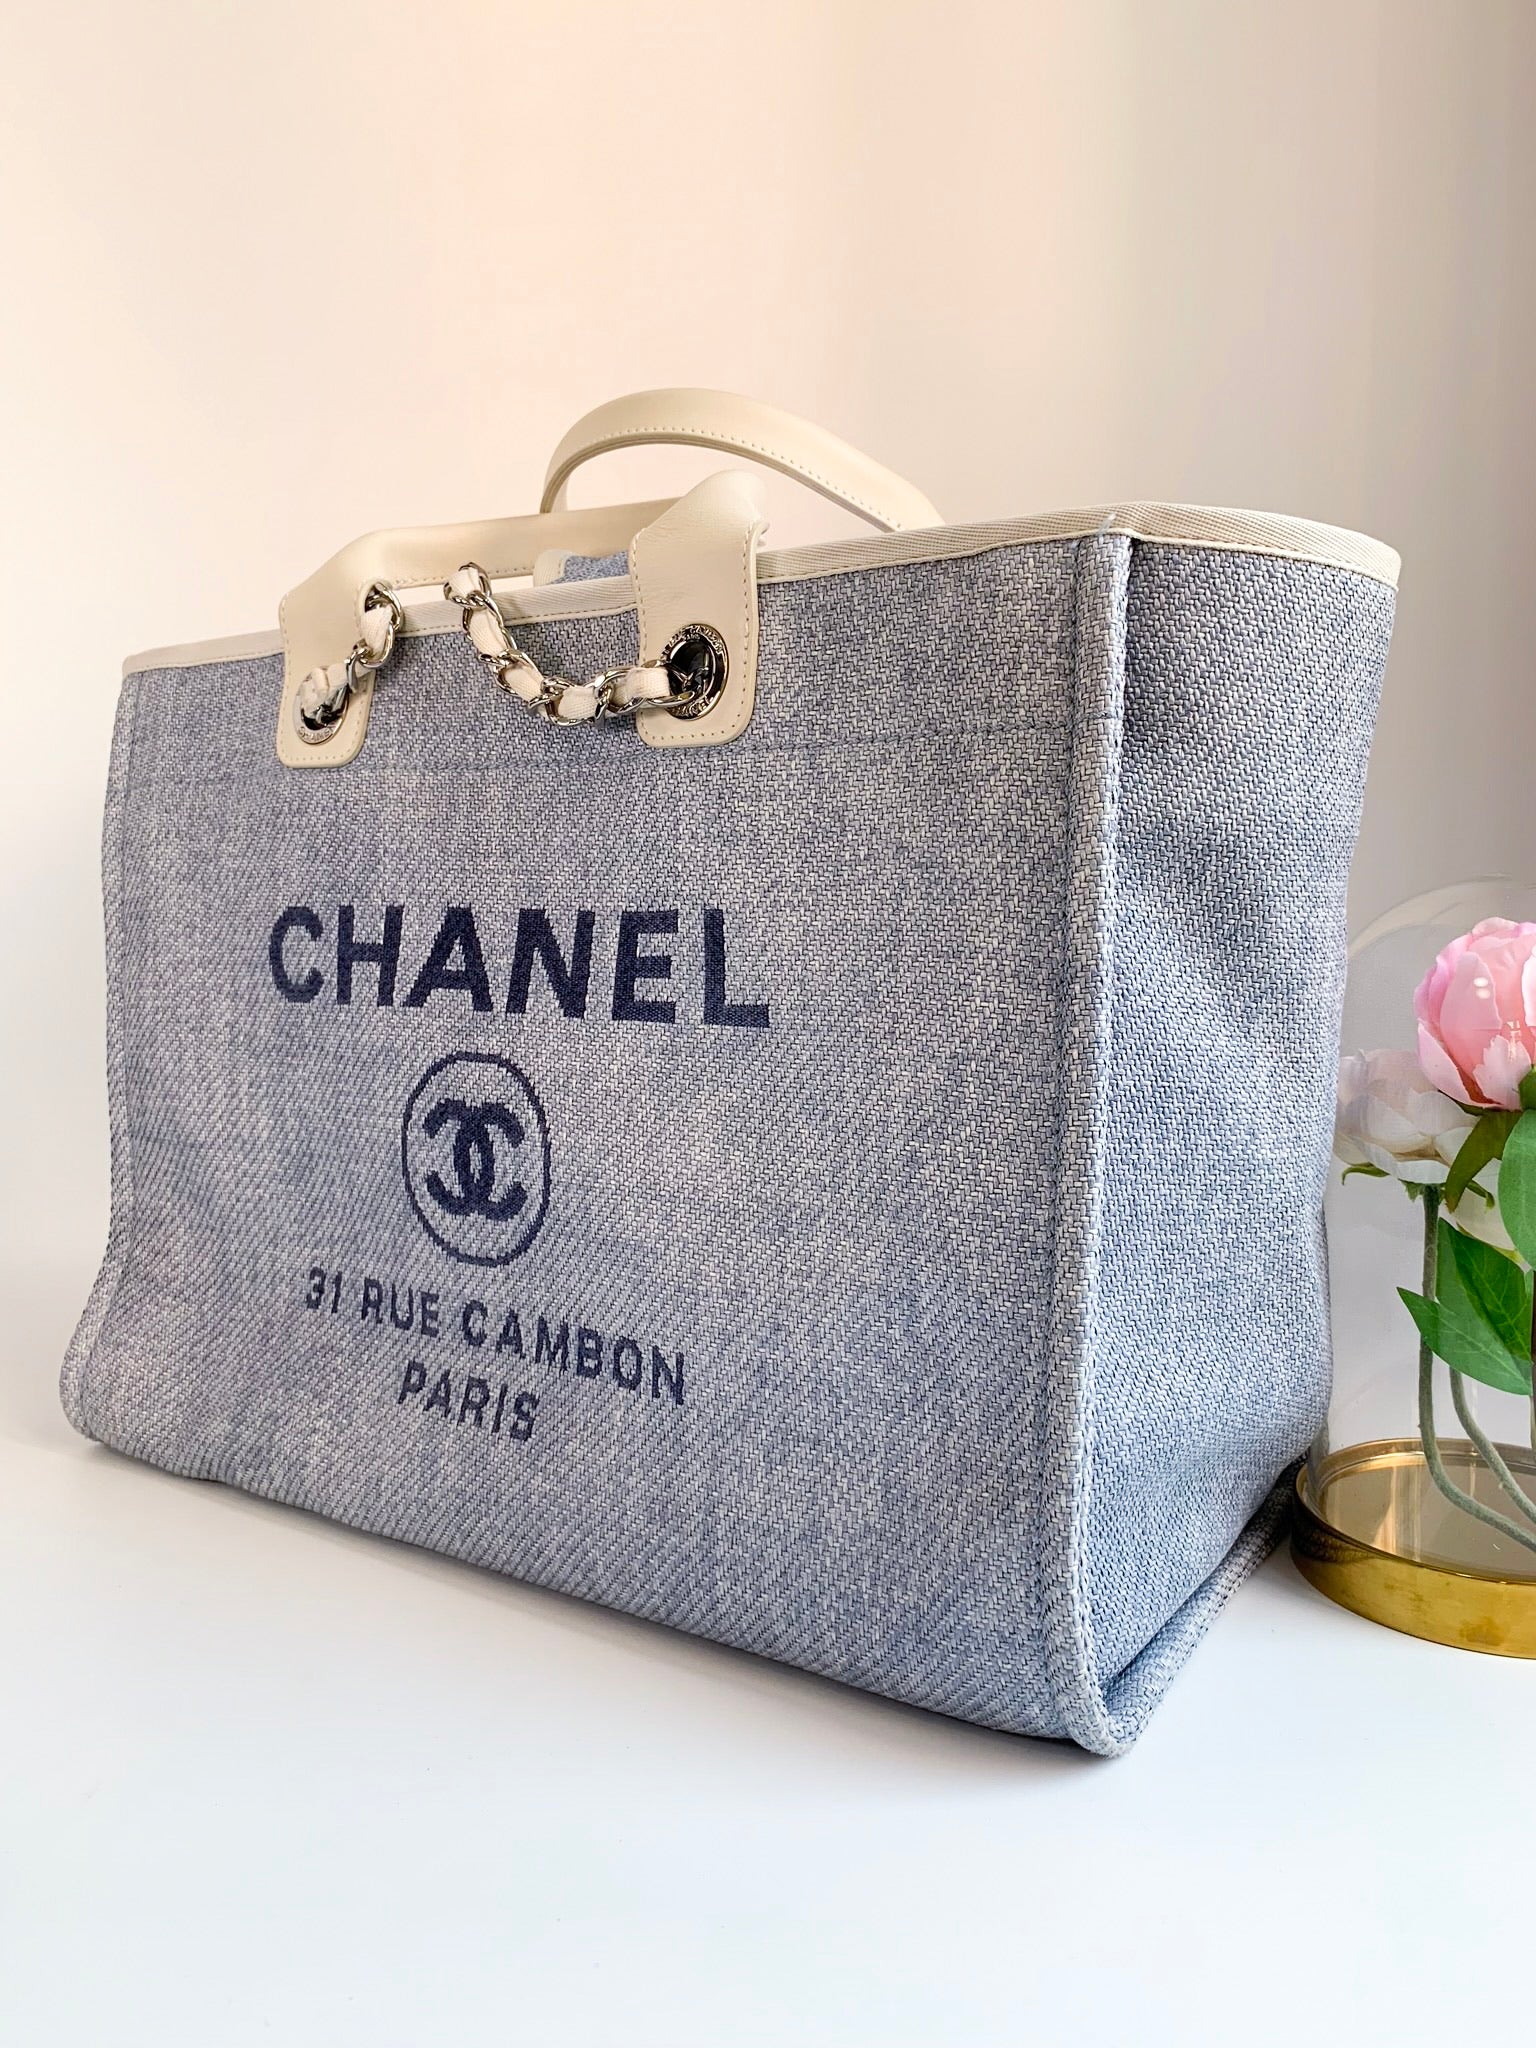 Chanel Blue Denim Canvas and Sequin Deauville Backpack Bag